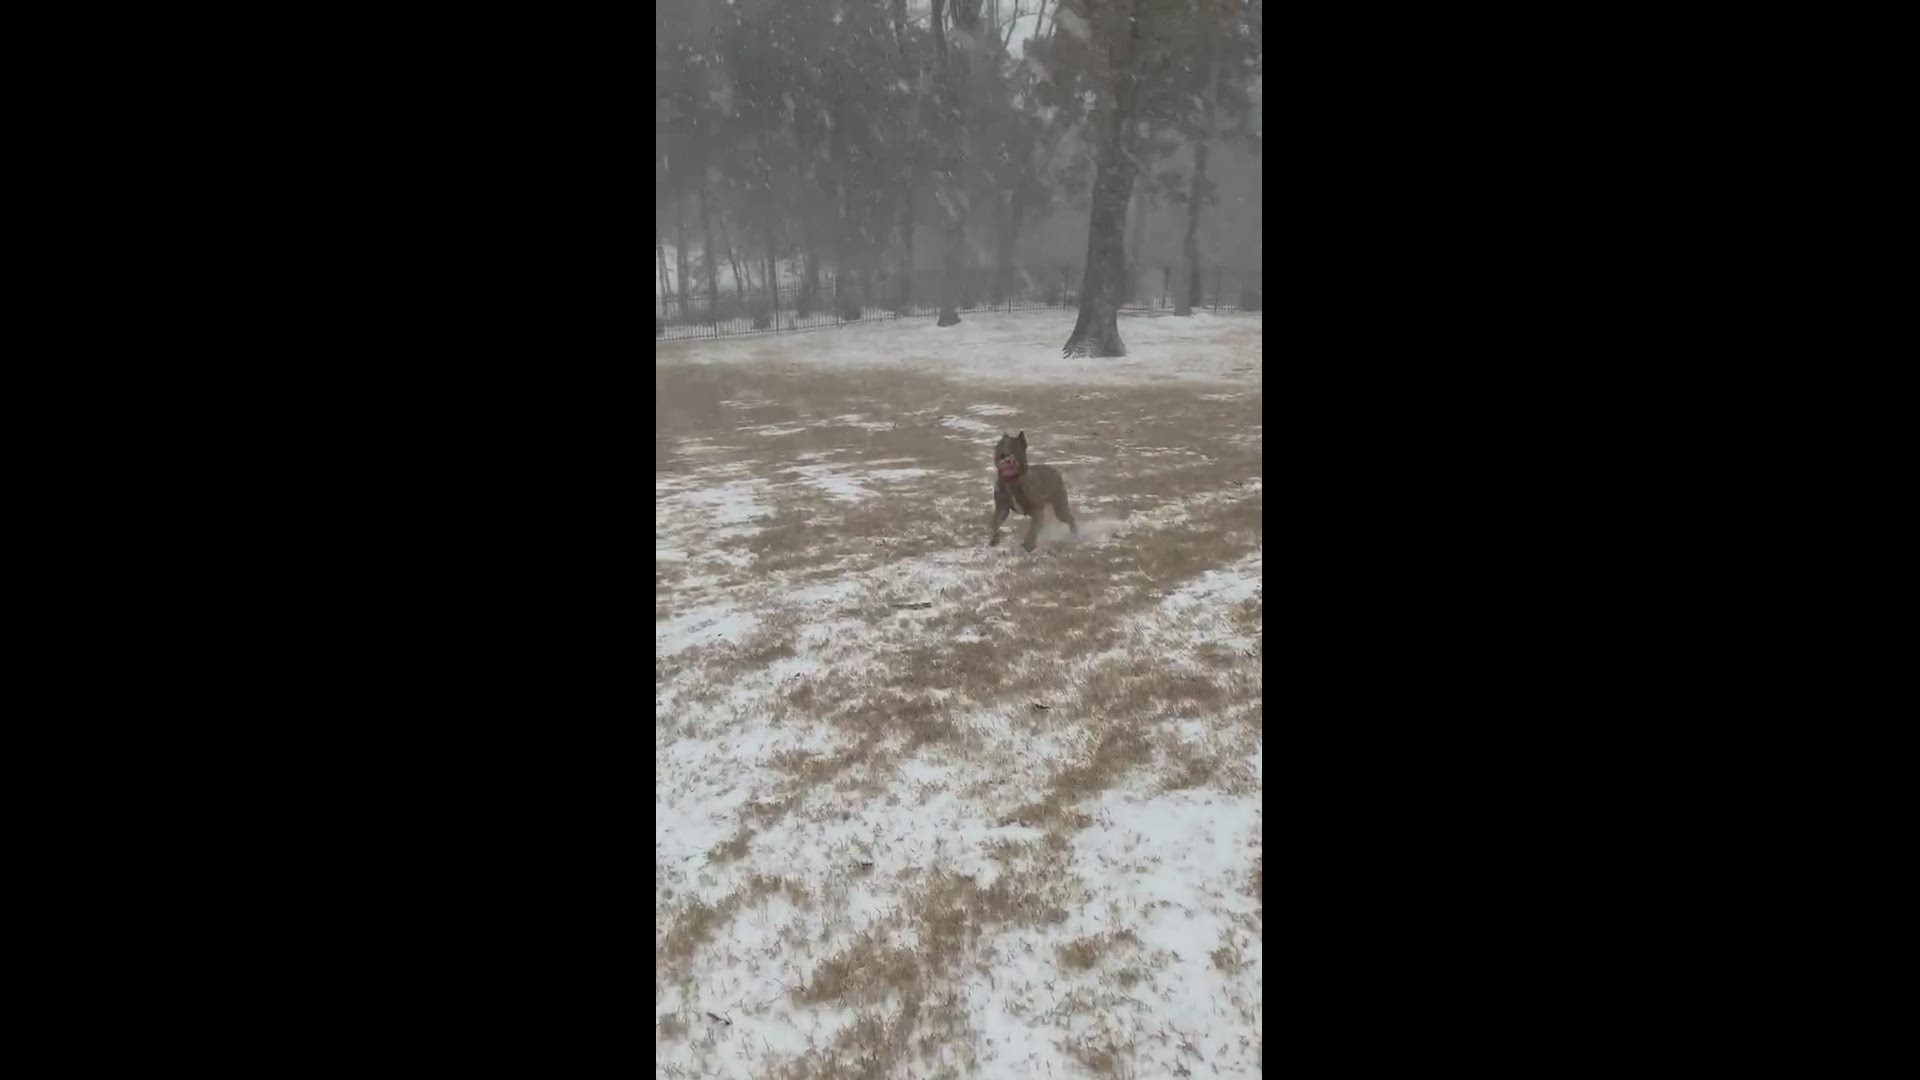 Freight the Cane Corso having fun in the snow - Olive Branch, MS
Credit: Rebekah Olsen